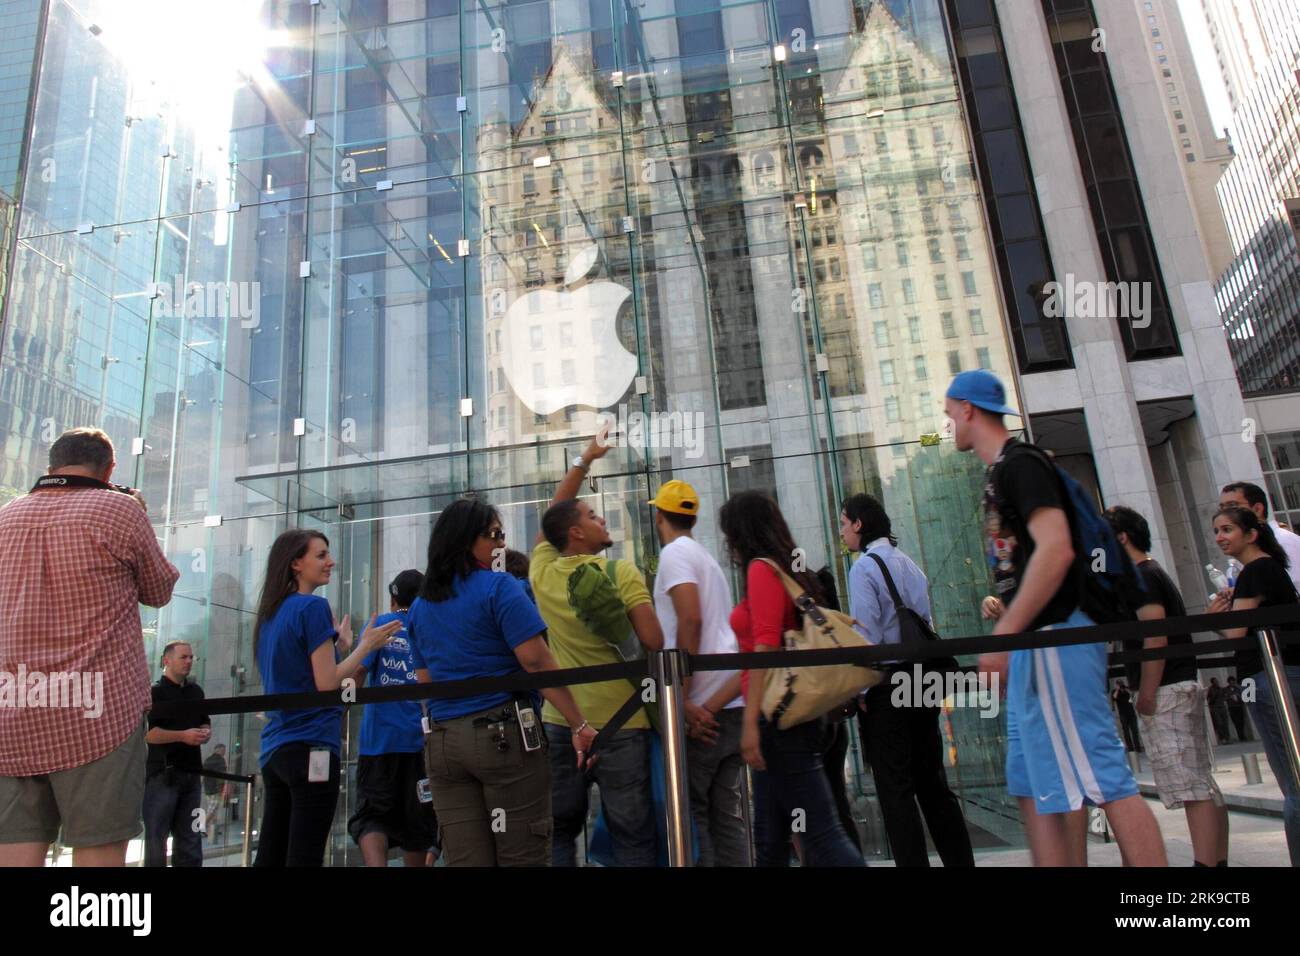 Bildnummer: 54169004  Datum: 24.06.2010  Copyright: imago/Xinhua NEW YORK, June 24, 2010 (Xinhua) -- Apple fans line up to buy the new iPhone4 at Manhattan s 5th avenue Apple Store in New York, the United States, on June 24, 2010. The iPhone 4 on Thursday made its global debuts in the five countries of Britain, France, Germany, Japan and the United States. (Xinhua/Wu Kaixiang) (2)US-NEW YORK-APPLE IPHONE 4-LAUNCH PUBLICATIONxNOTxINxCHN Wirtschaft kbdig xkg 2010 quer o0 neu neues i phone Handy Verkauf Verkaufsstart, Andrang, Wartende, Warteschlange    Bildnummer 54169004 Date 24 06 2010 Copyrig Stock Photo